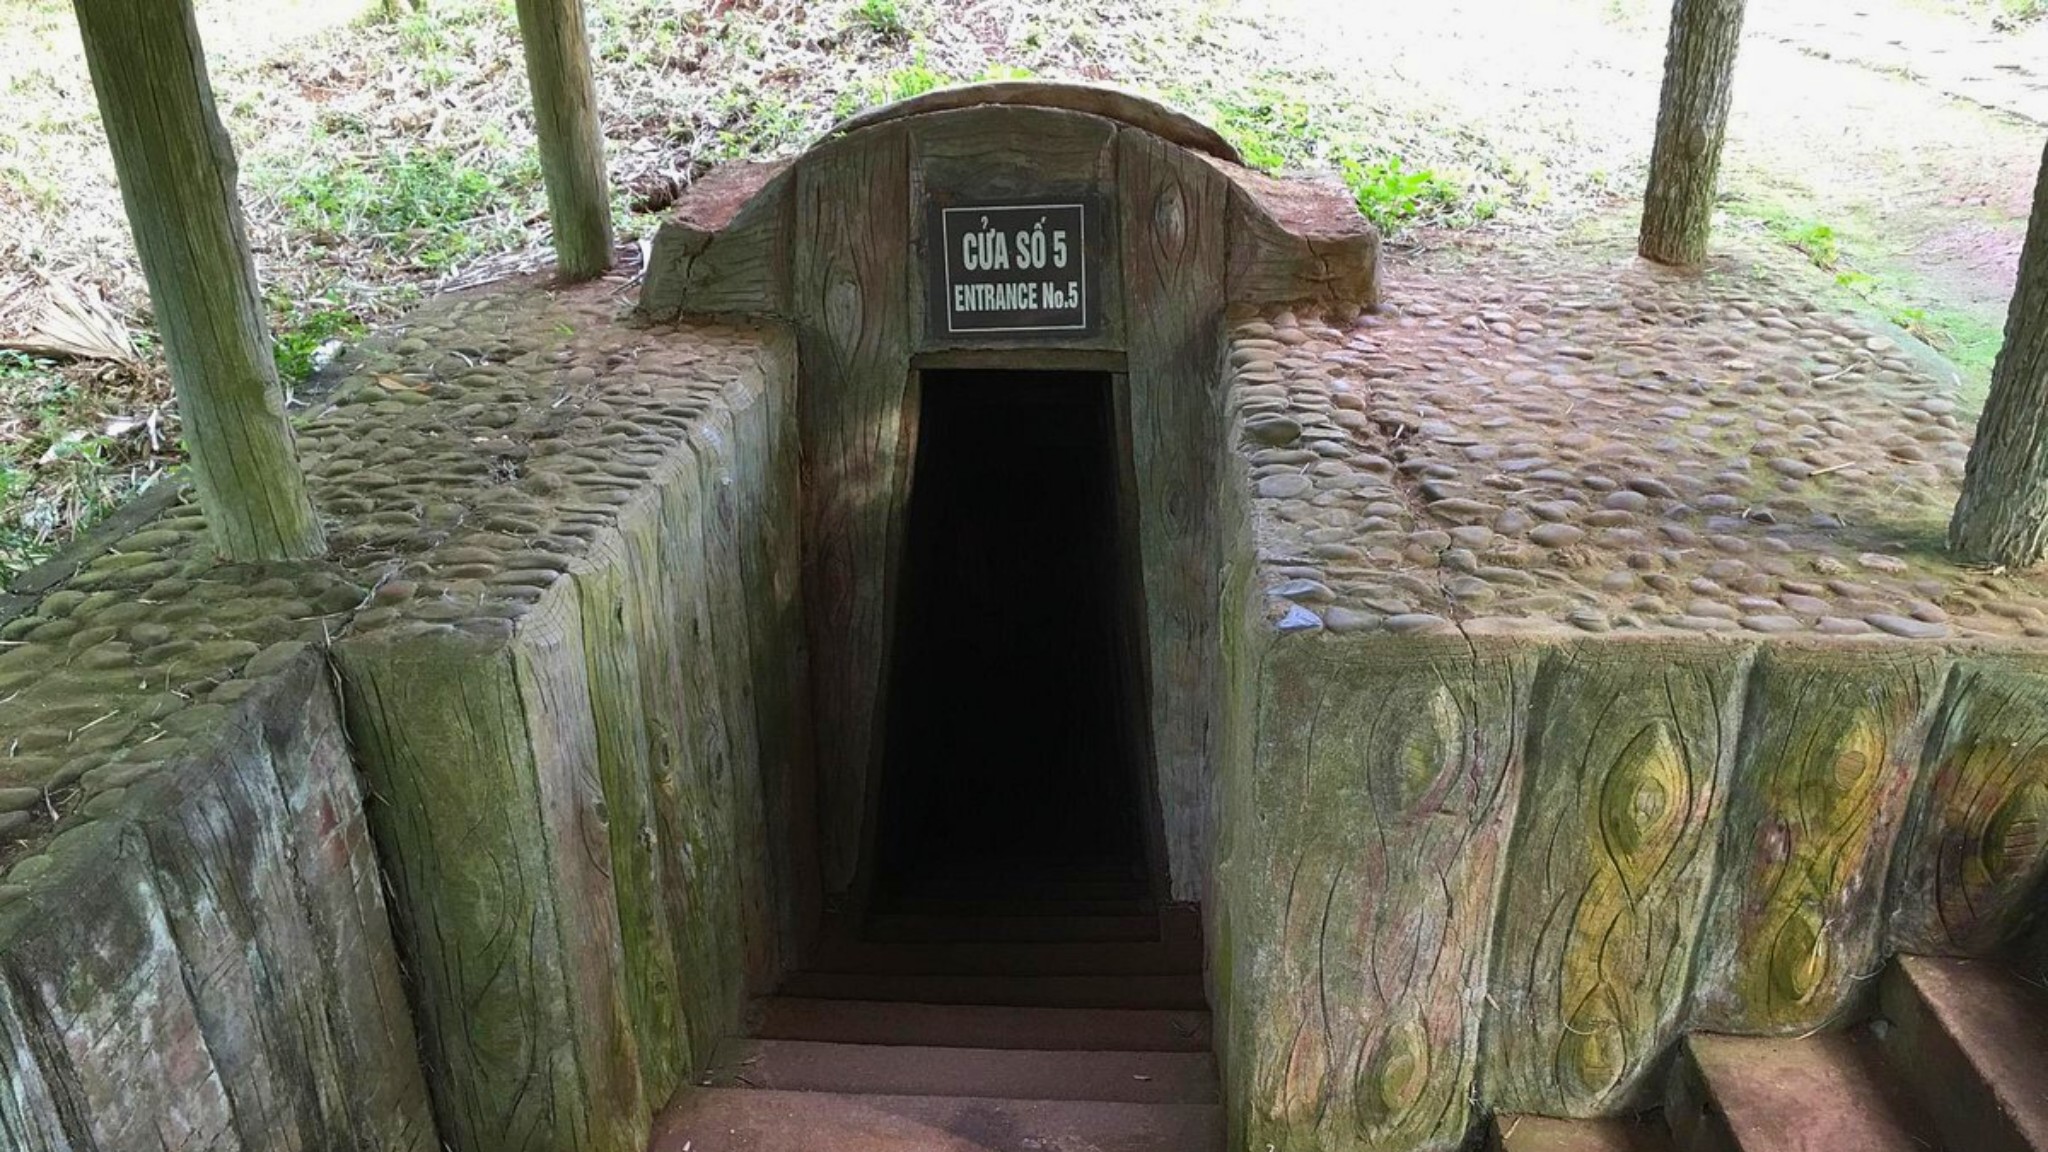 Day 8 Explore The Mystery Of Vinh Moc Tunnels